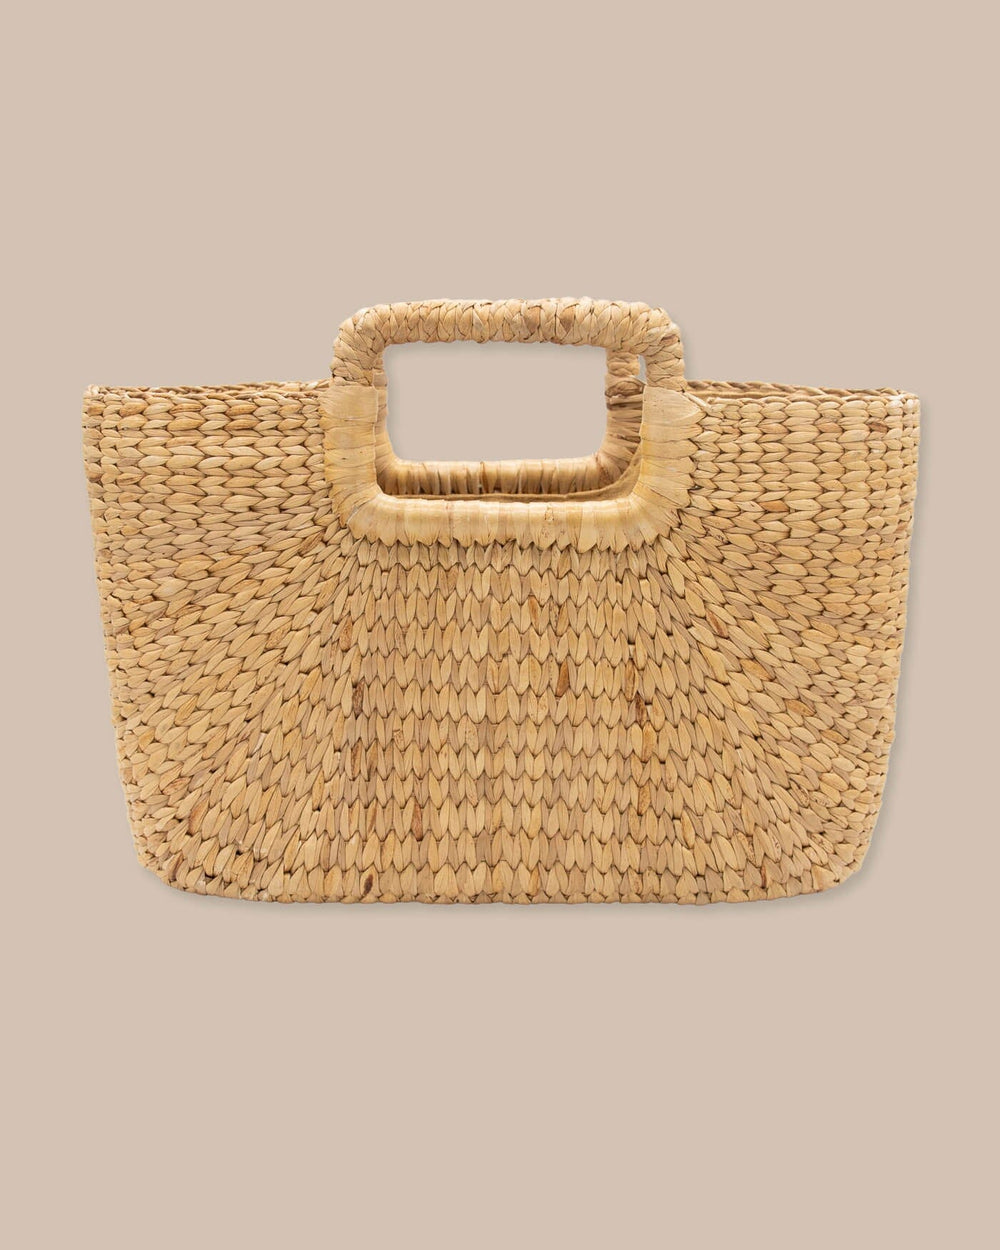 The front view of the Southern Tide Mini Straw Bag by Southern Tide - Natural